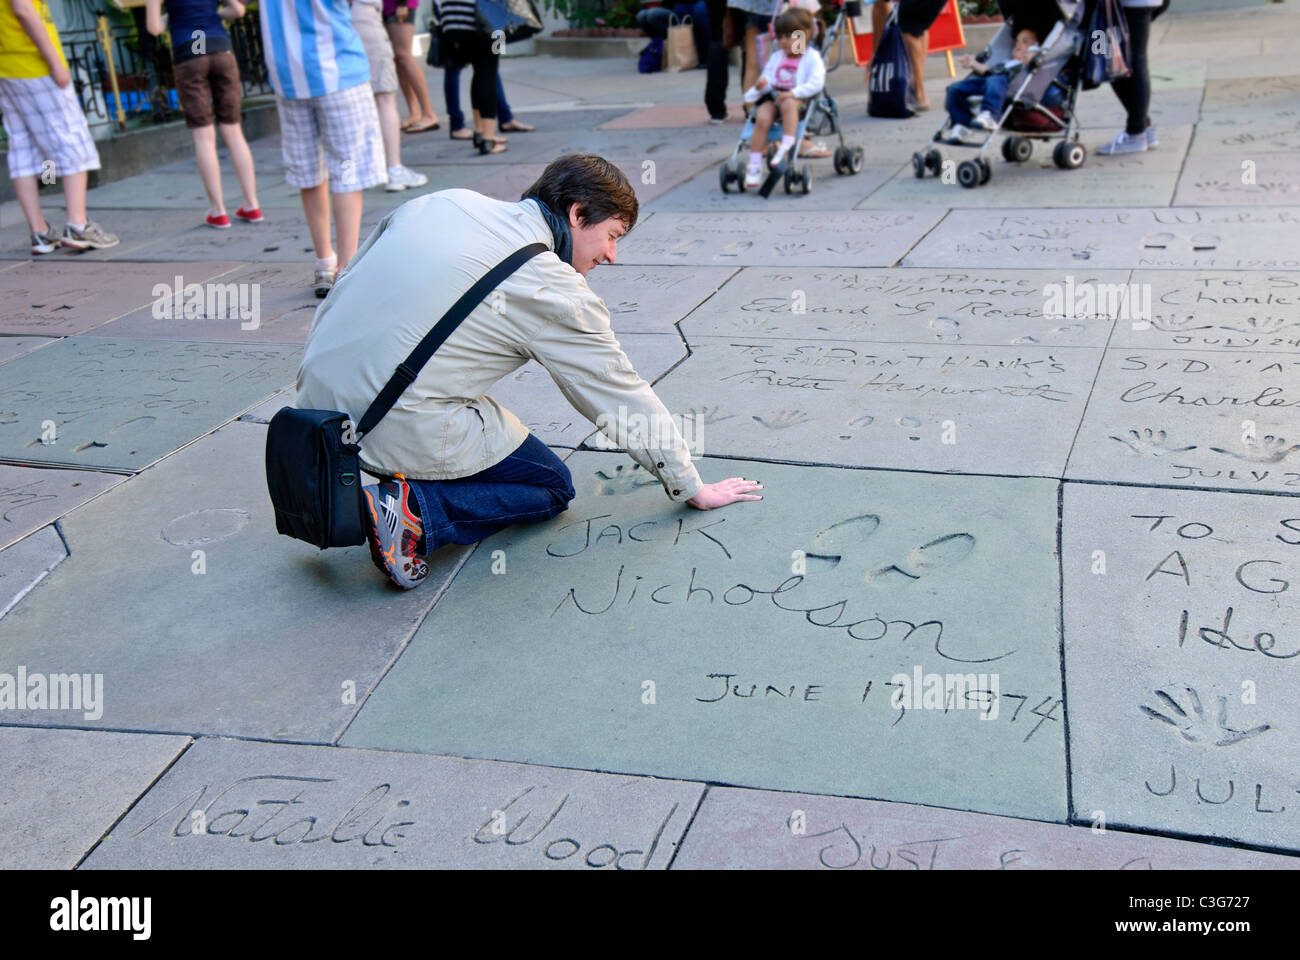 Grauman's Chinese Theatre in Hollywood, California. Stock Photo